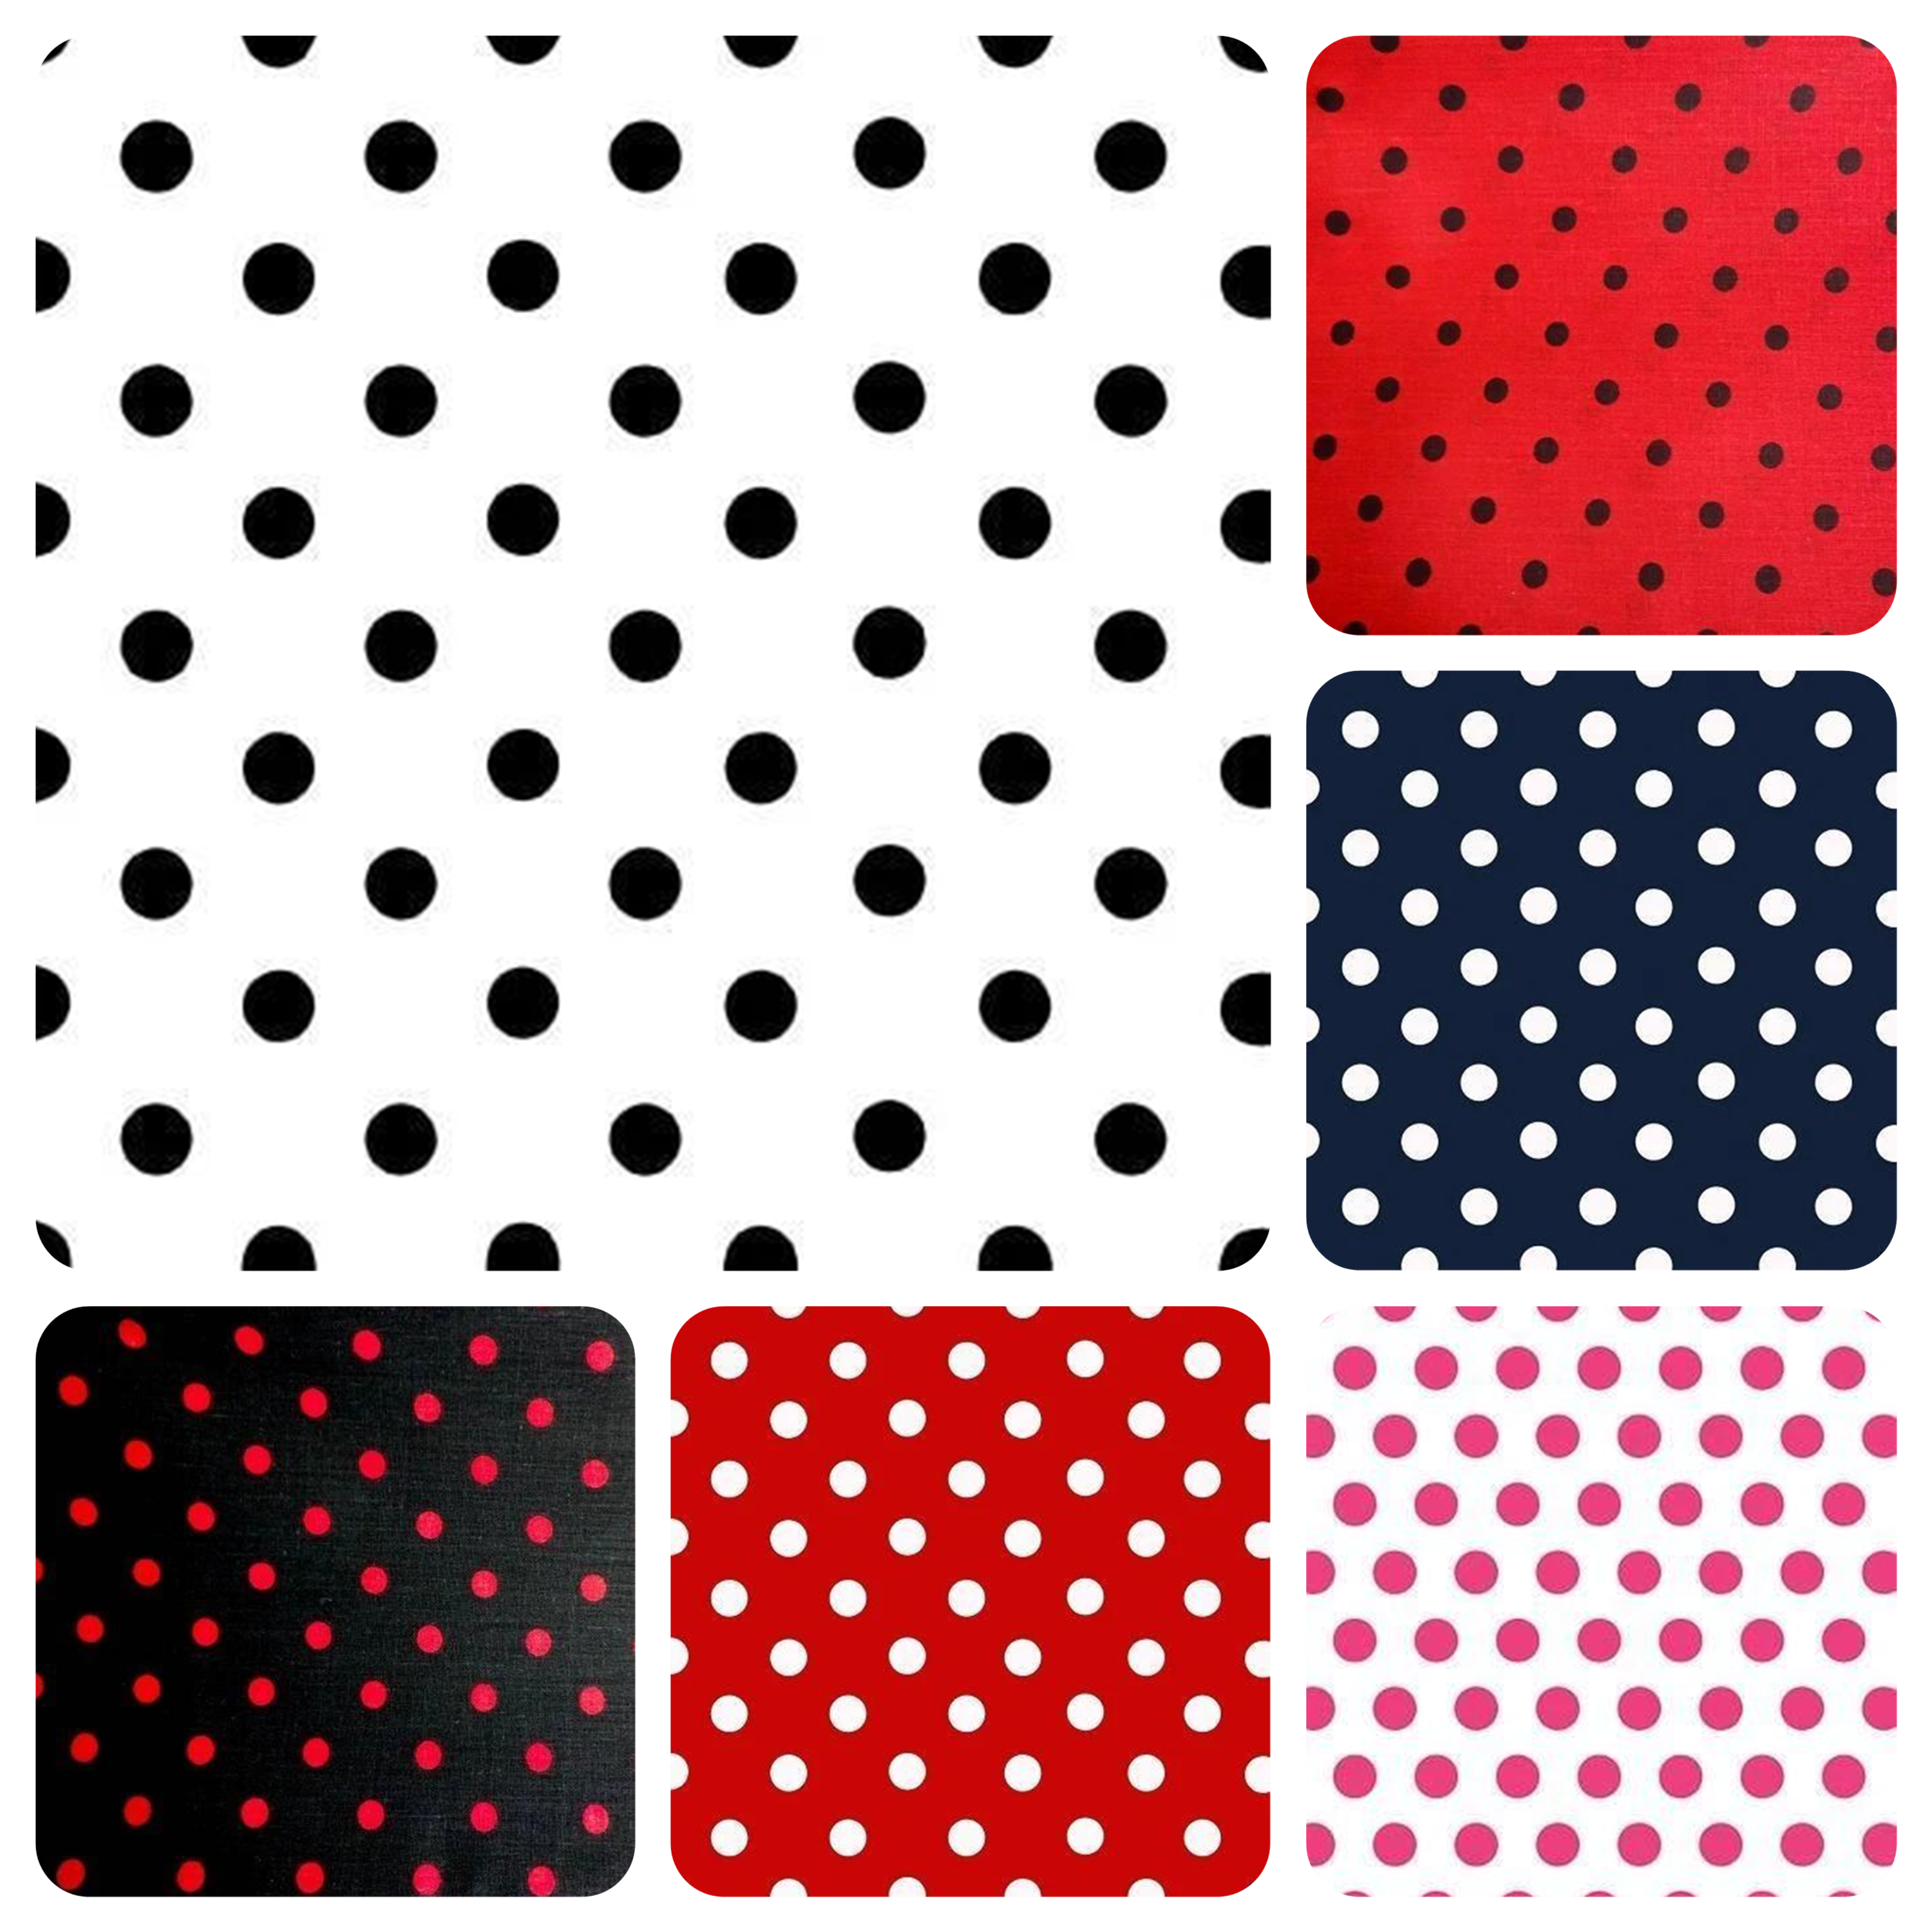 1/2" Polka Dot/Spot Poly Cotton Fabric By the YardCotton FabricICEFABRICICE FABRICSWhite Dot on Black11/2" Polka Dot/Spot Poly Cotton Fabric By the Yard ICEFABRIC